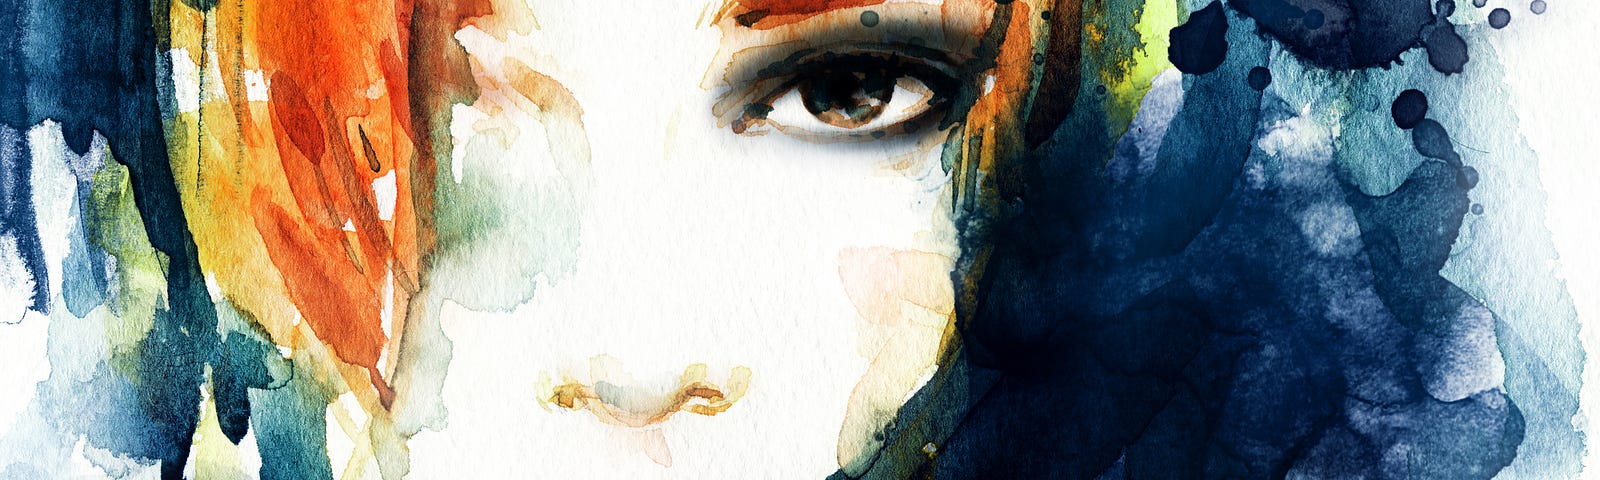 Watercolor image of a beautiful female face